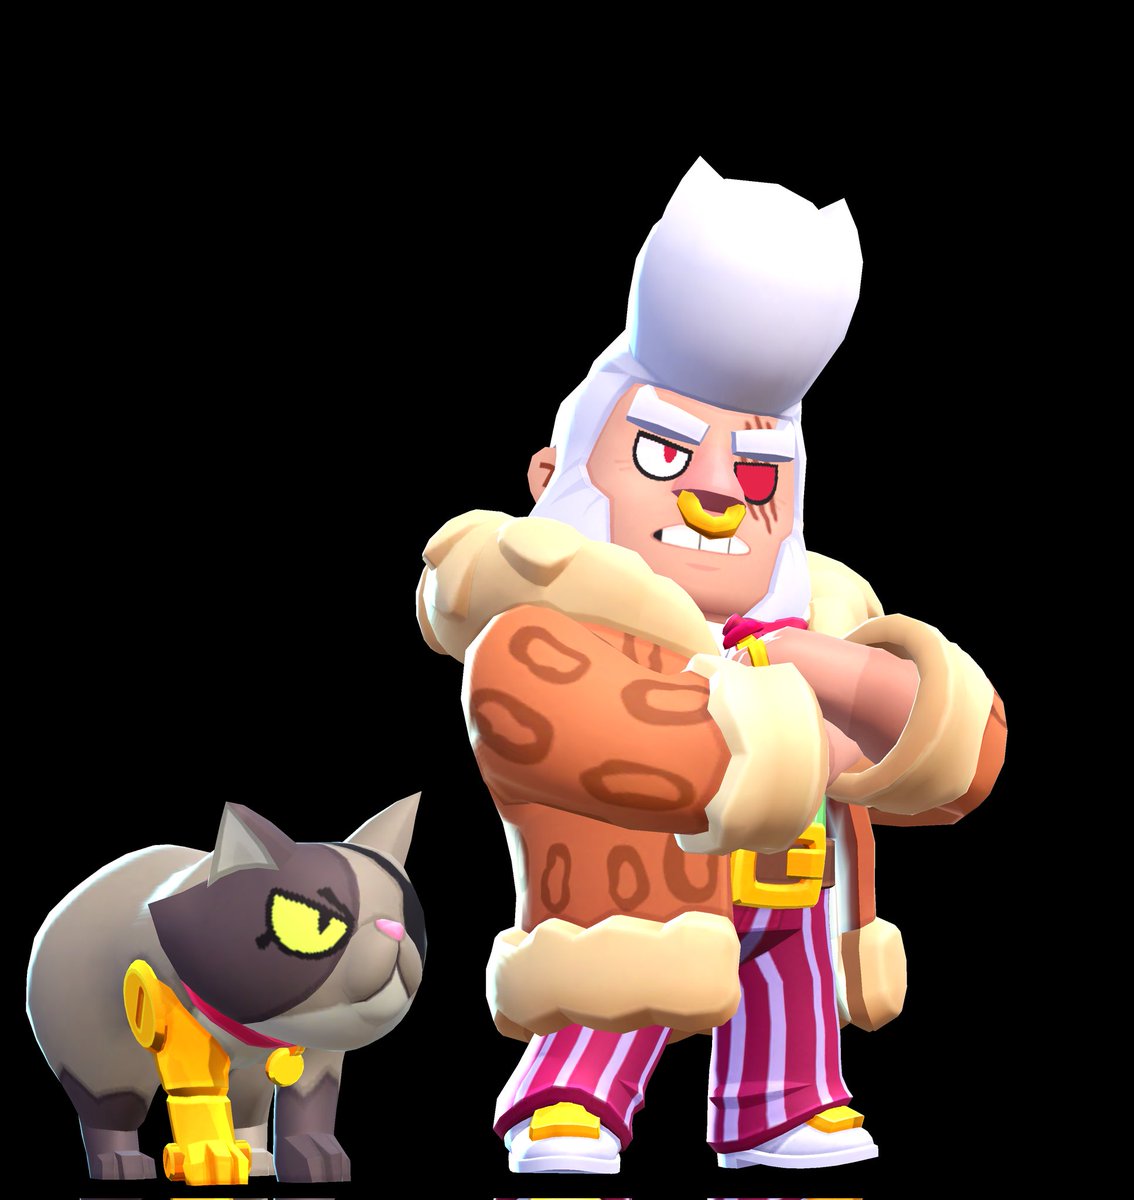 🚨 1x Alleycat Bull Giveaway + 2× Alleycat Bull Giveaway on my discord server 🚨 To enter: ✅Follow Me ❤️Like 🔁Retweet 💥Discord 2×Alley Cat Bull Skin Giveaway💥 👉Enter Here : discord.gg/QH4tG7q👈 🏆Winners annouced on 7th March🏆 #BrawlStars #alleycatbullgiveaway